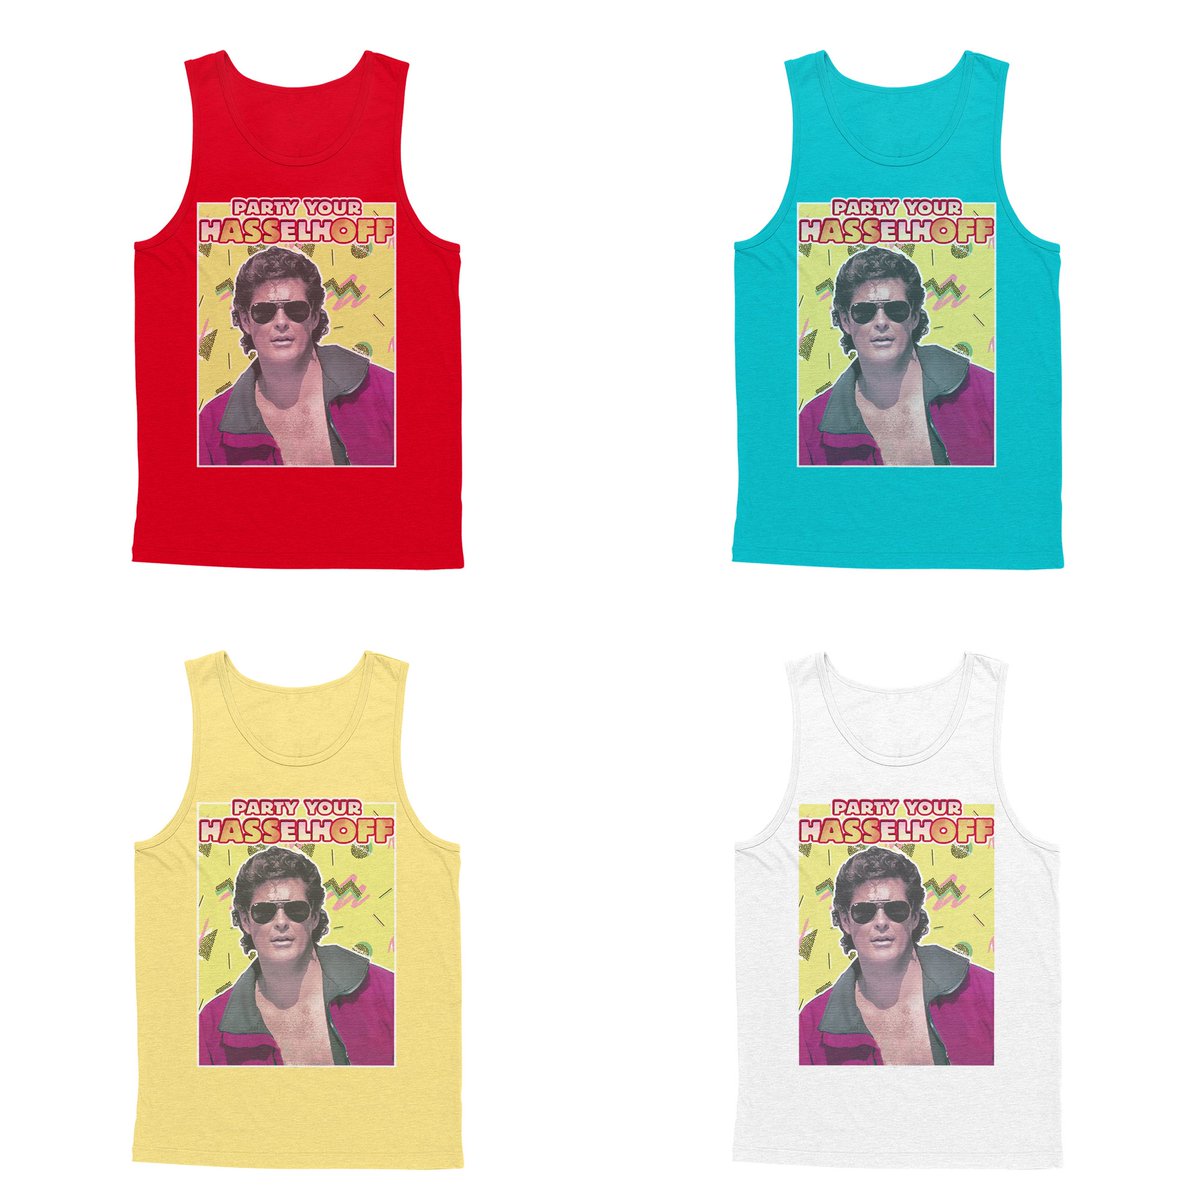 Stay cool this summer with a #partyyourhASSelhOFF tank top!  Get Yours At https://t.co/UaWzv5saVT  #CysticFibrosis https://t.co/RmzG42Vntb